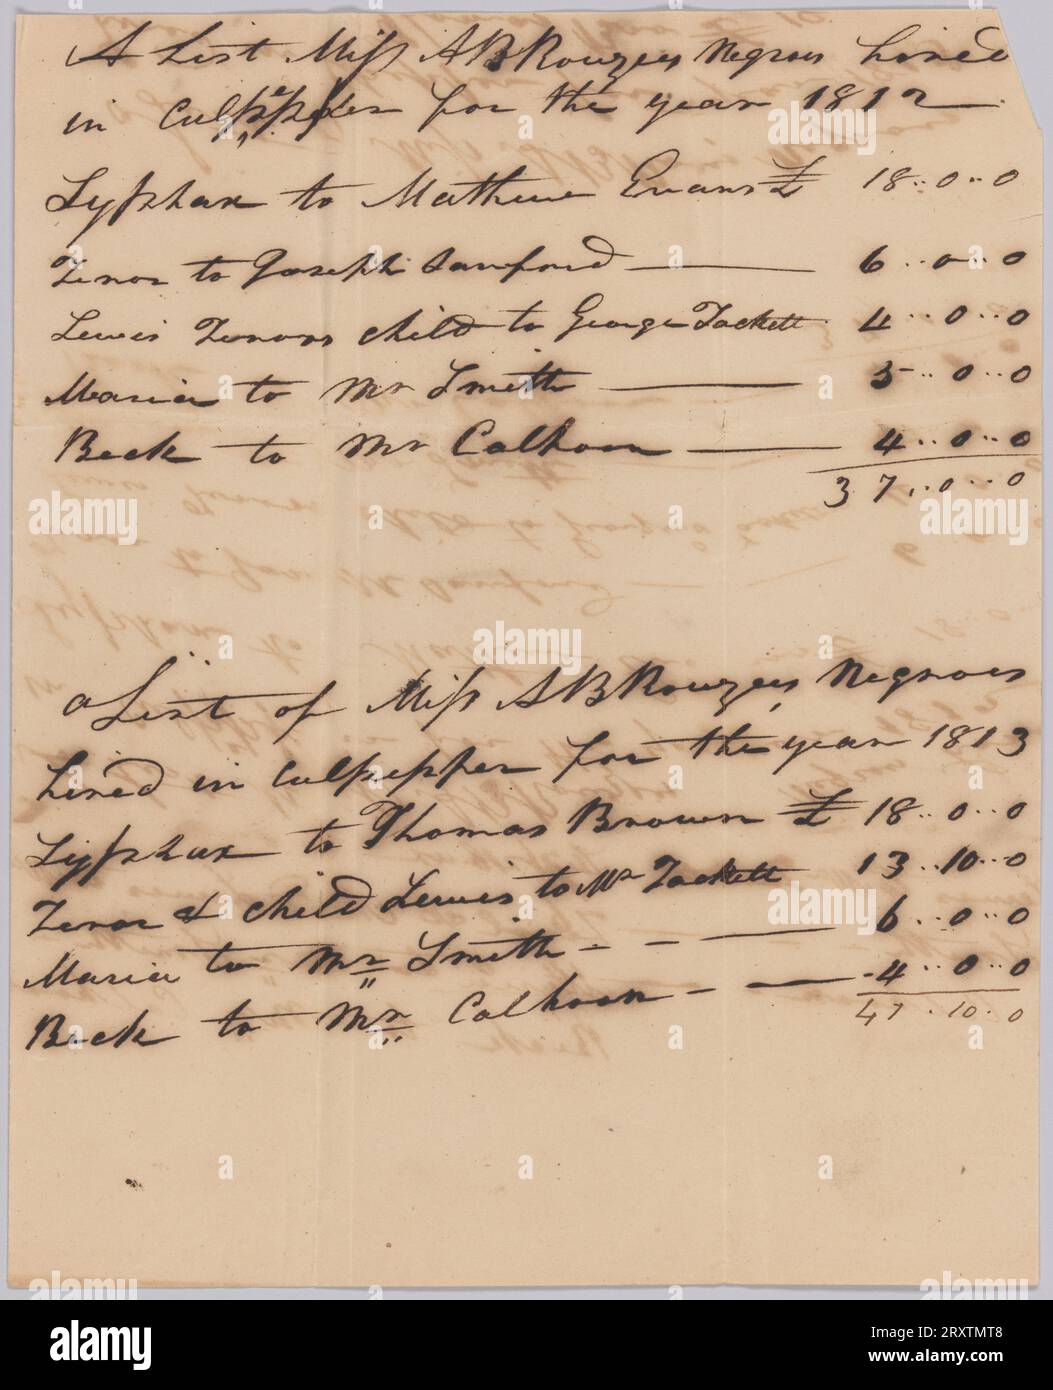 Account of hires of enslaved persons belonging to Apphia Rouzzee for 1812 1812-1813 Stock Photo